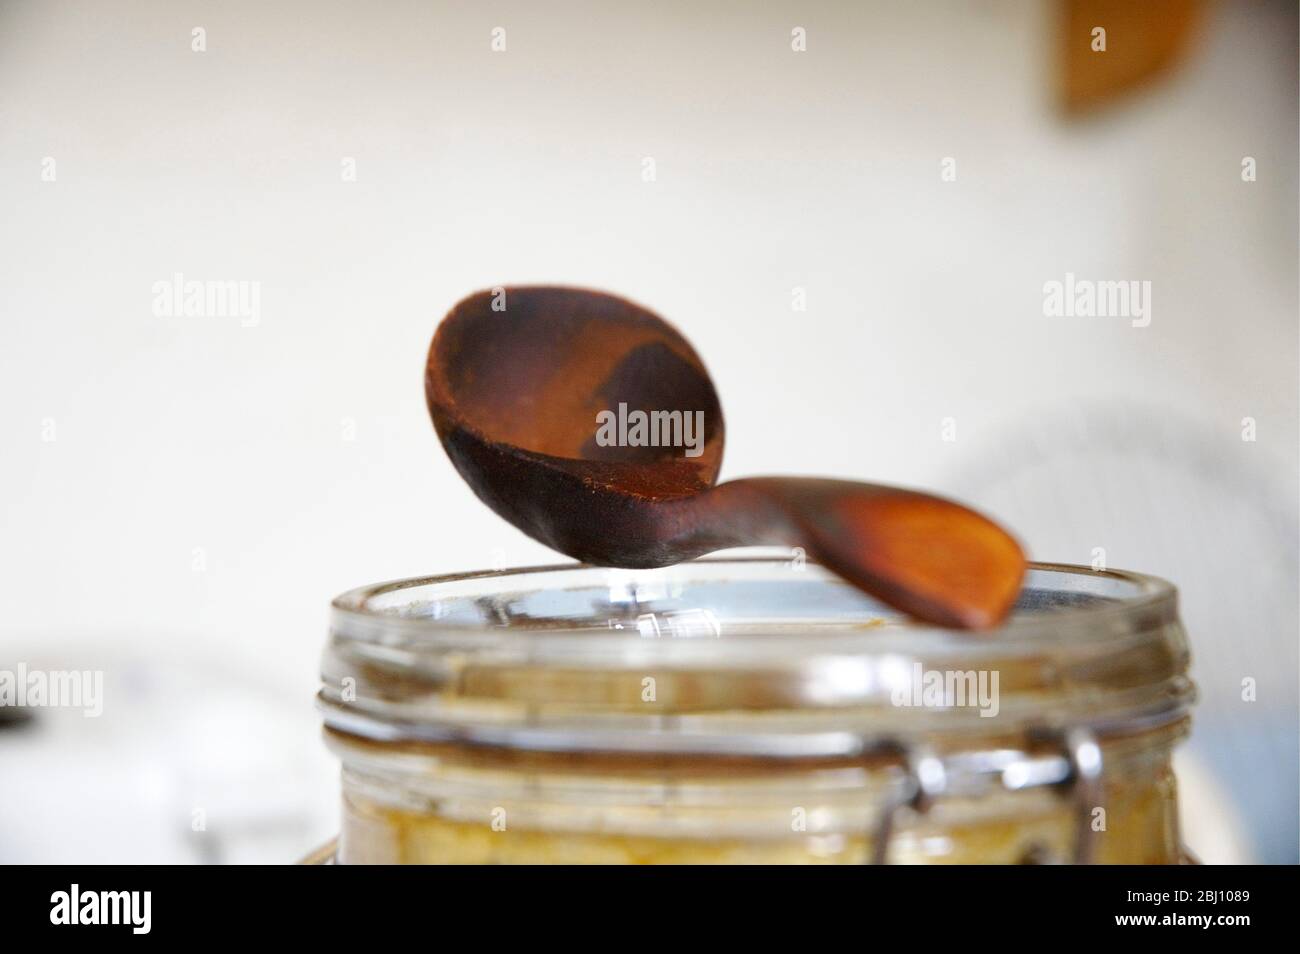 Well worn wooden coffee measure balanced on top of jar used for storing coffee - Stock Photo